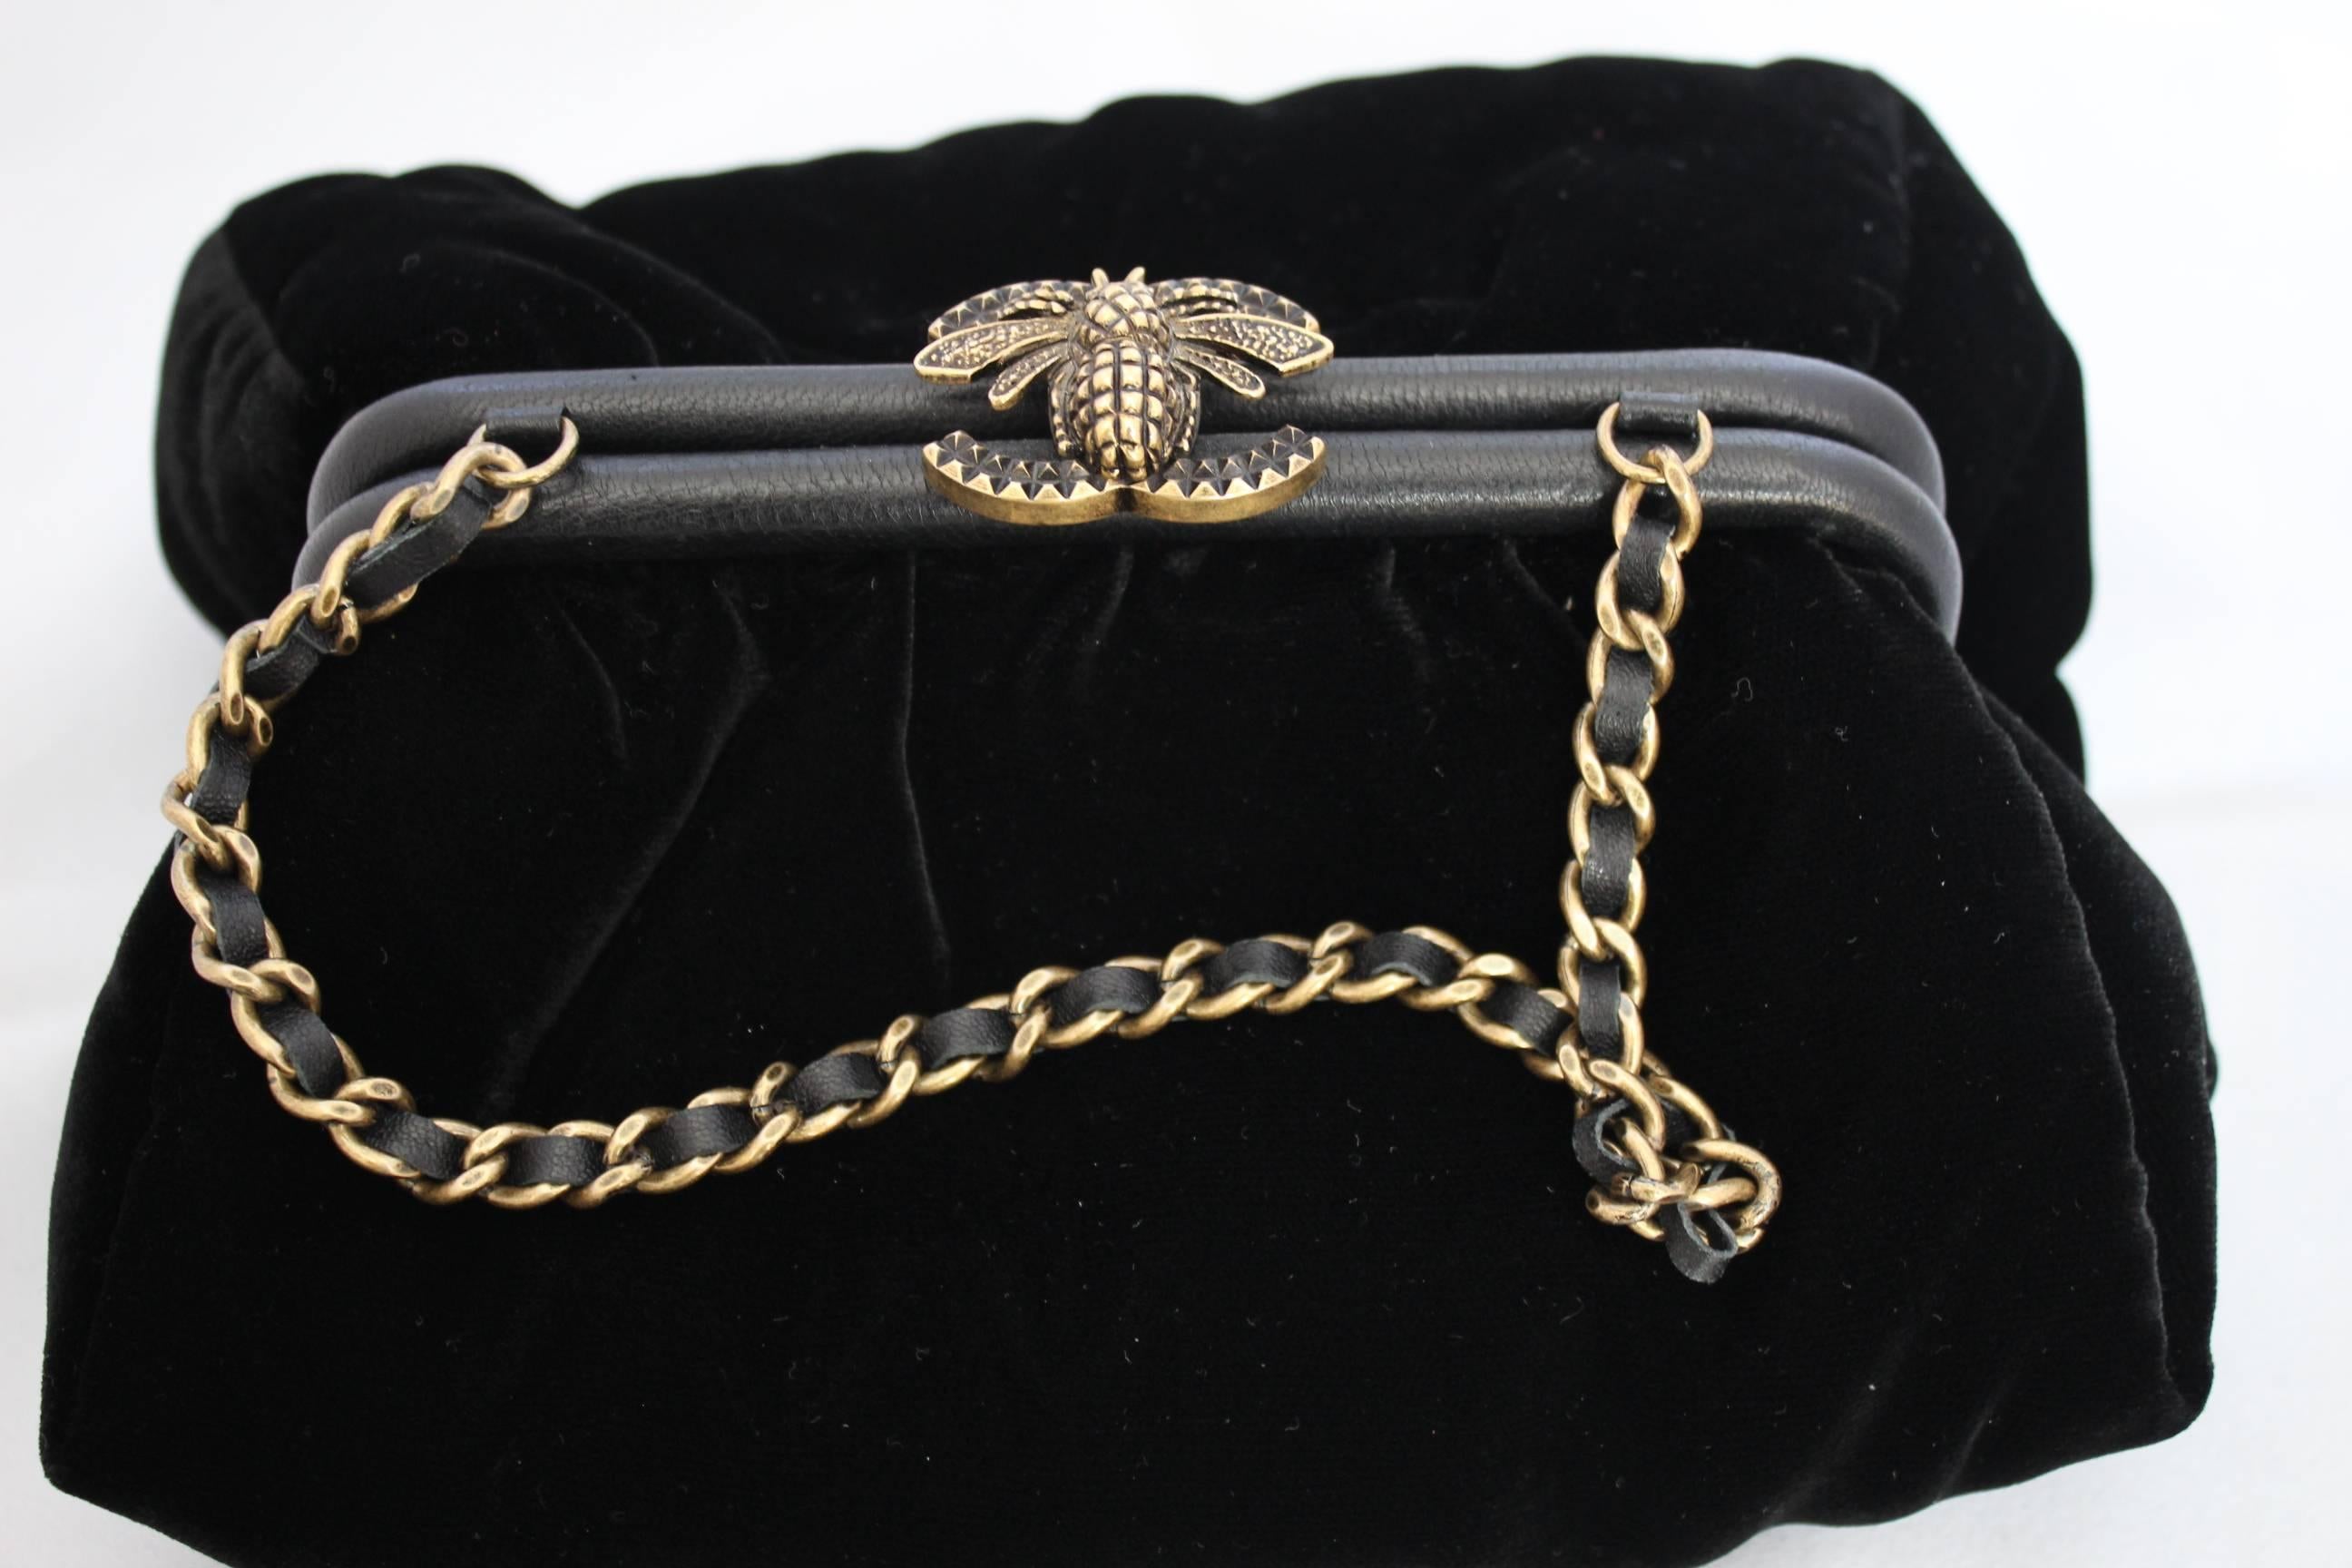 Gorgeous Bag from Chanel with an awesome clasp featuring a Bee.

Sold with dust bag.

Really good condition.